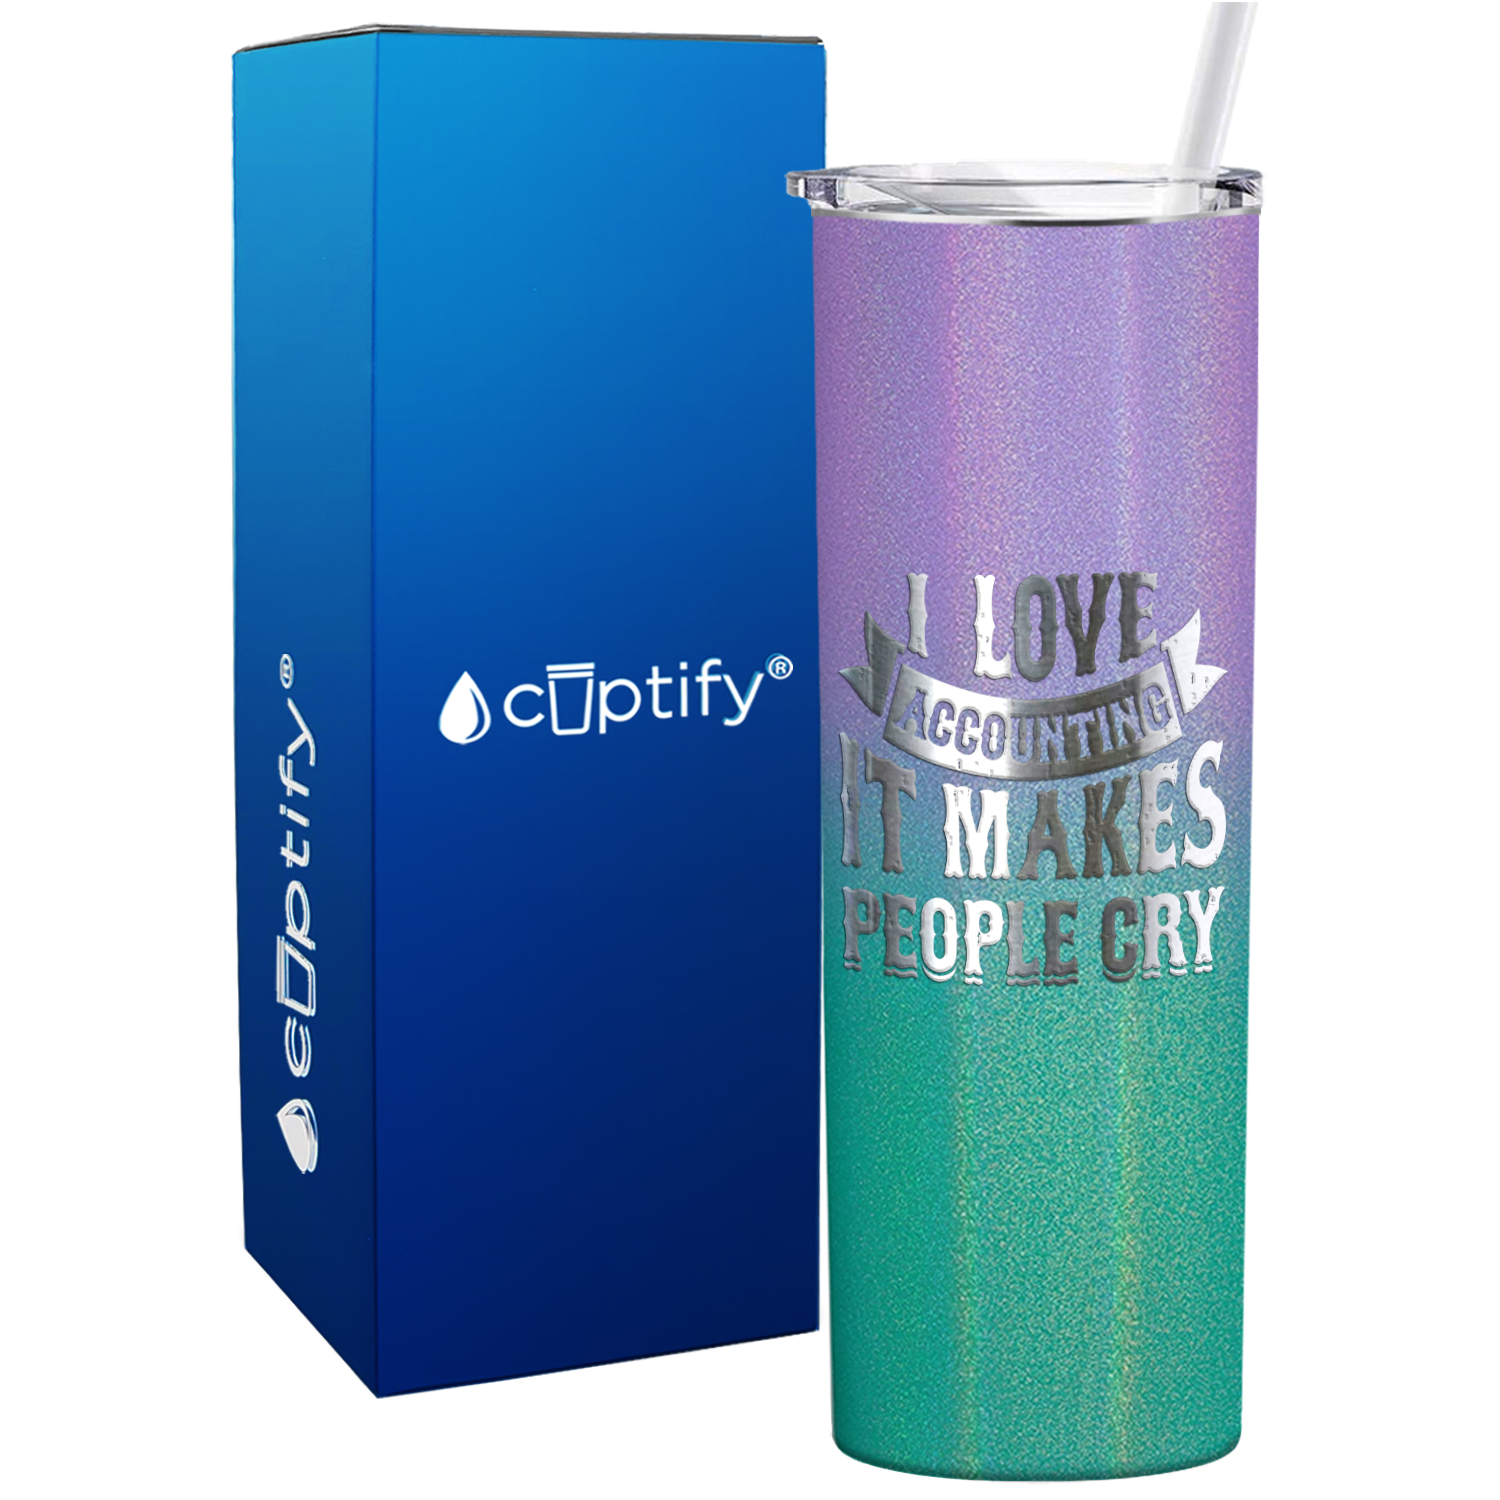 I Love Accounting it makes People Cry on 20oz Skinny Stainless Steel Tumbler